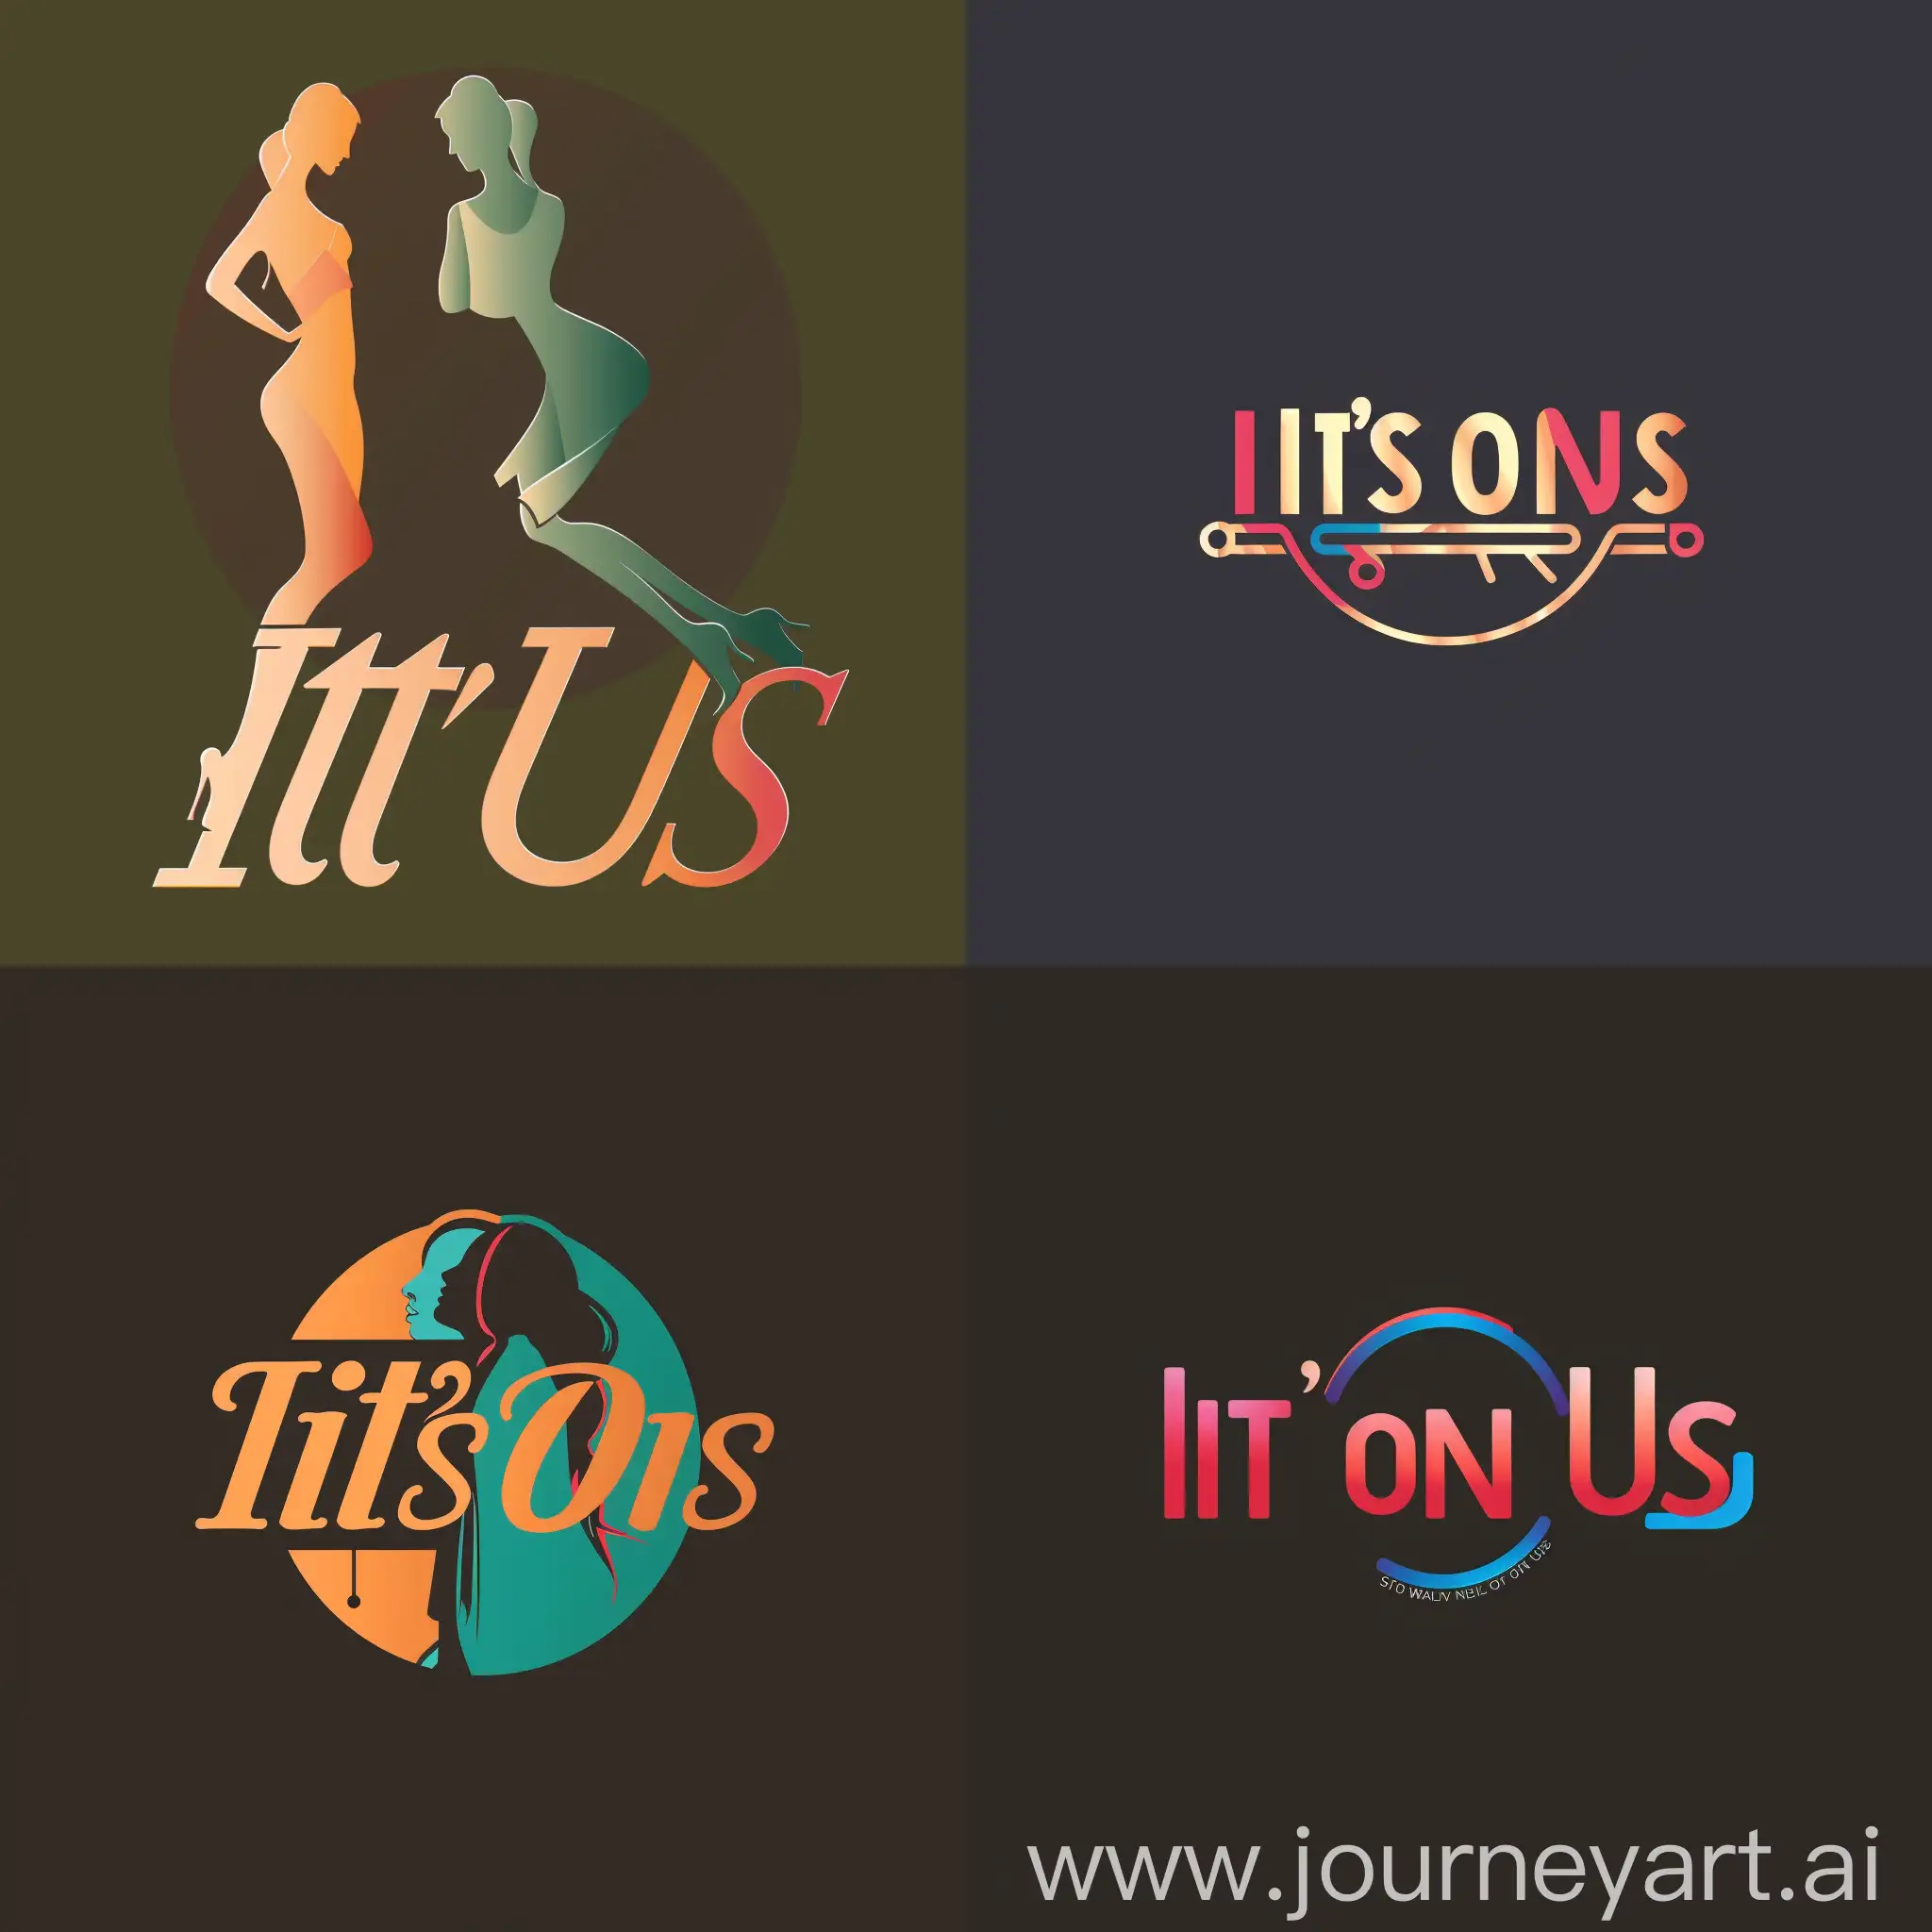 You are to create a logo for a company that provides personal shoppers on hire. The company name is "It's on Us". The colours in the logo should depict premium quality or exclusivity.